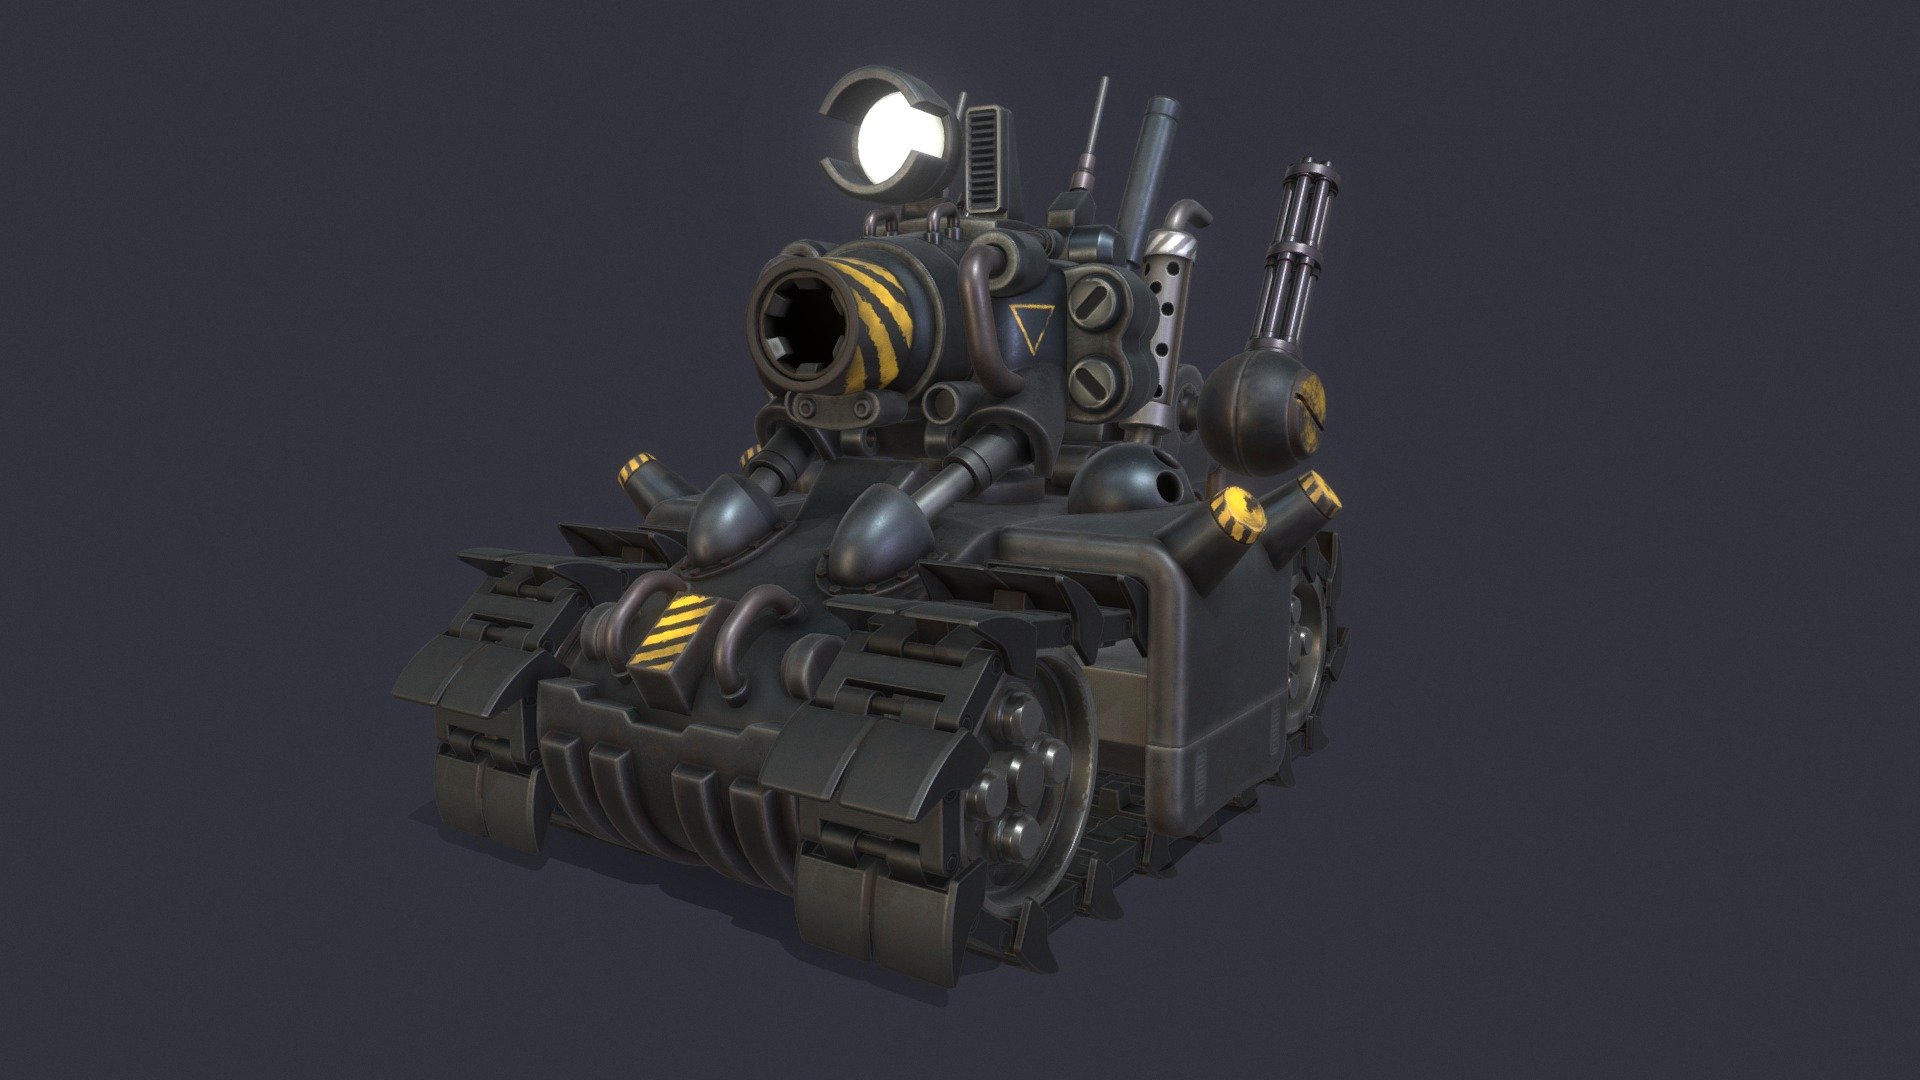 Modification and complete retexturing of my Super Vehicle 001 Metal Slug model.
With demo animation included 3d model